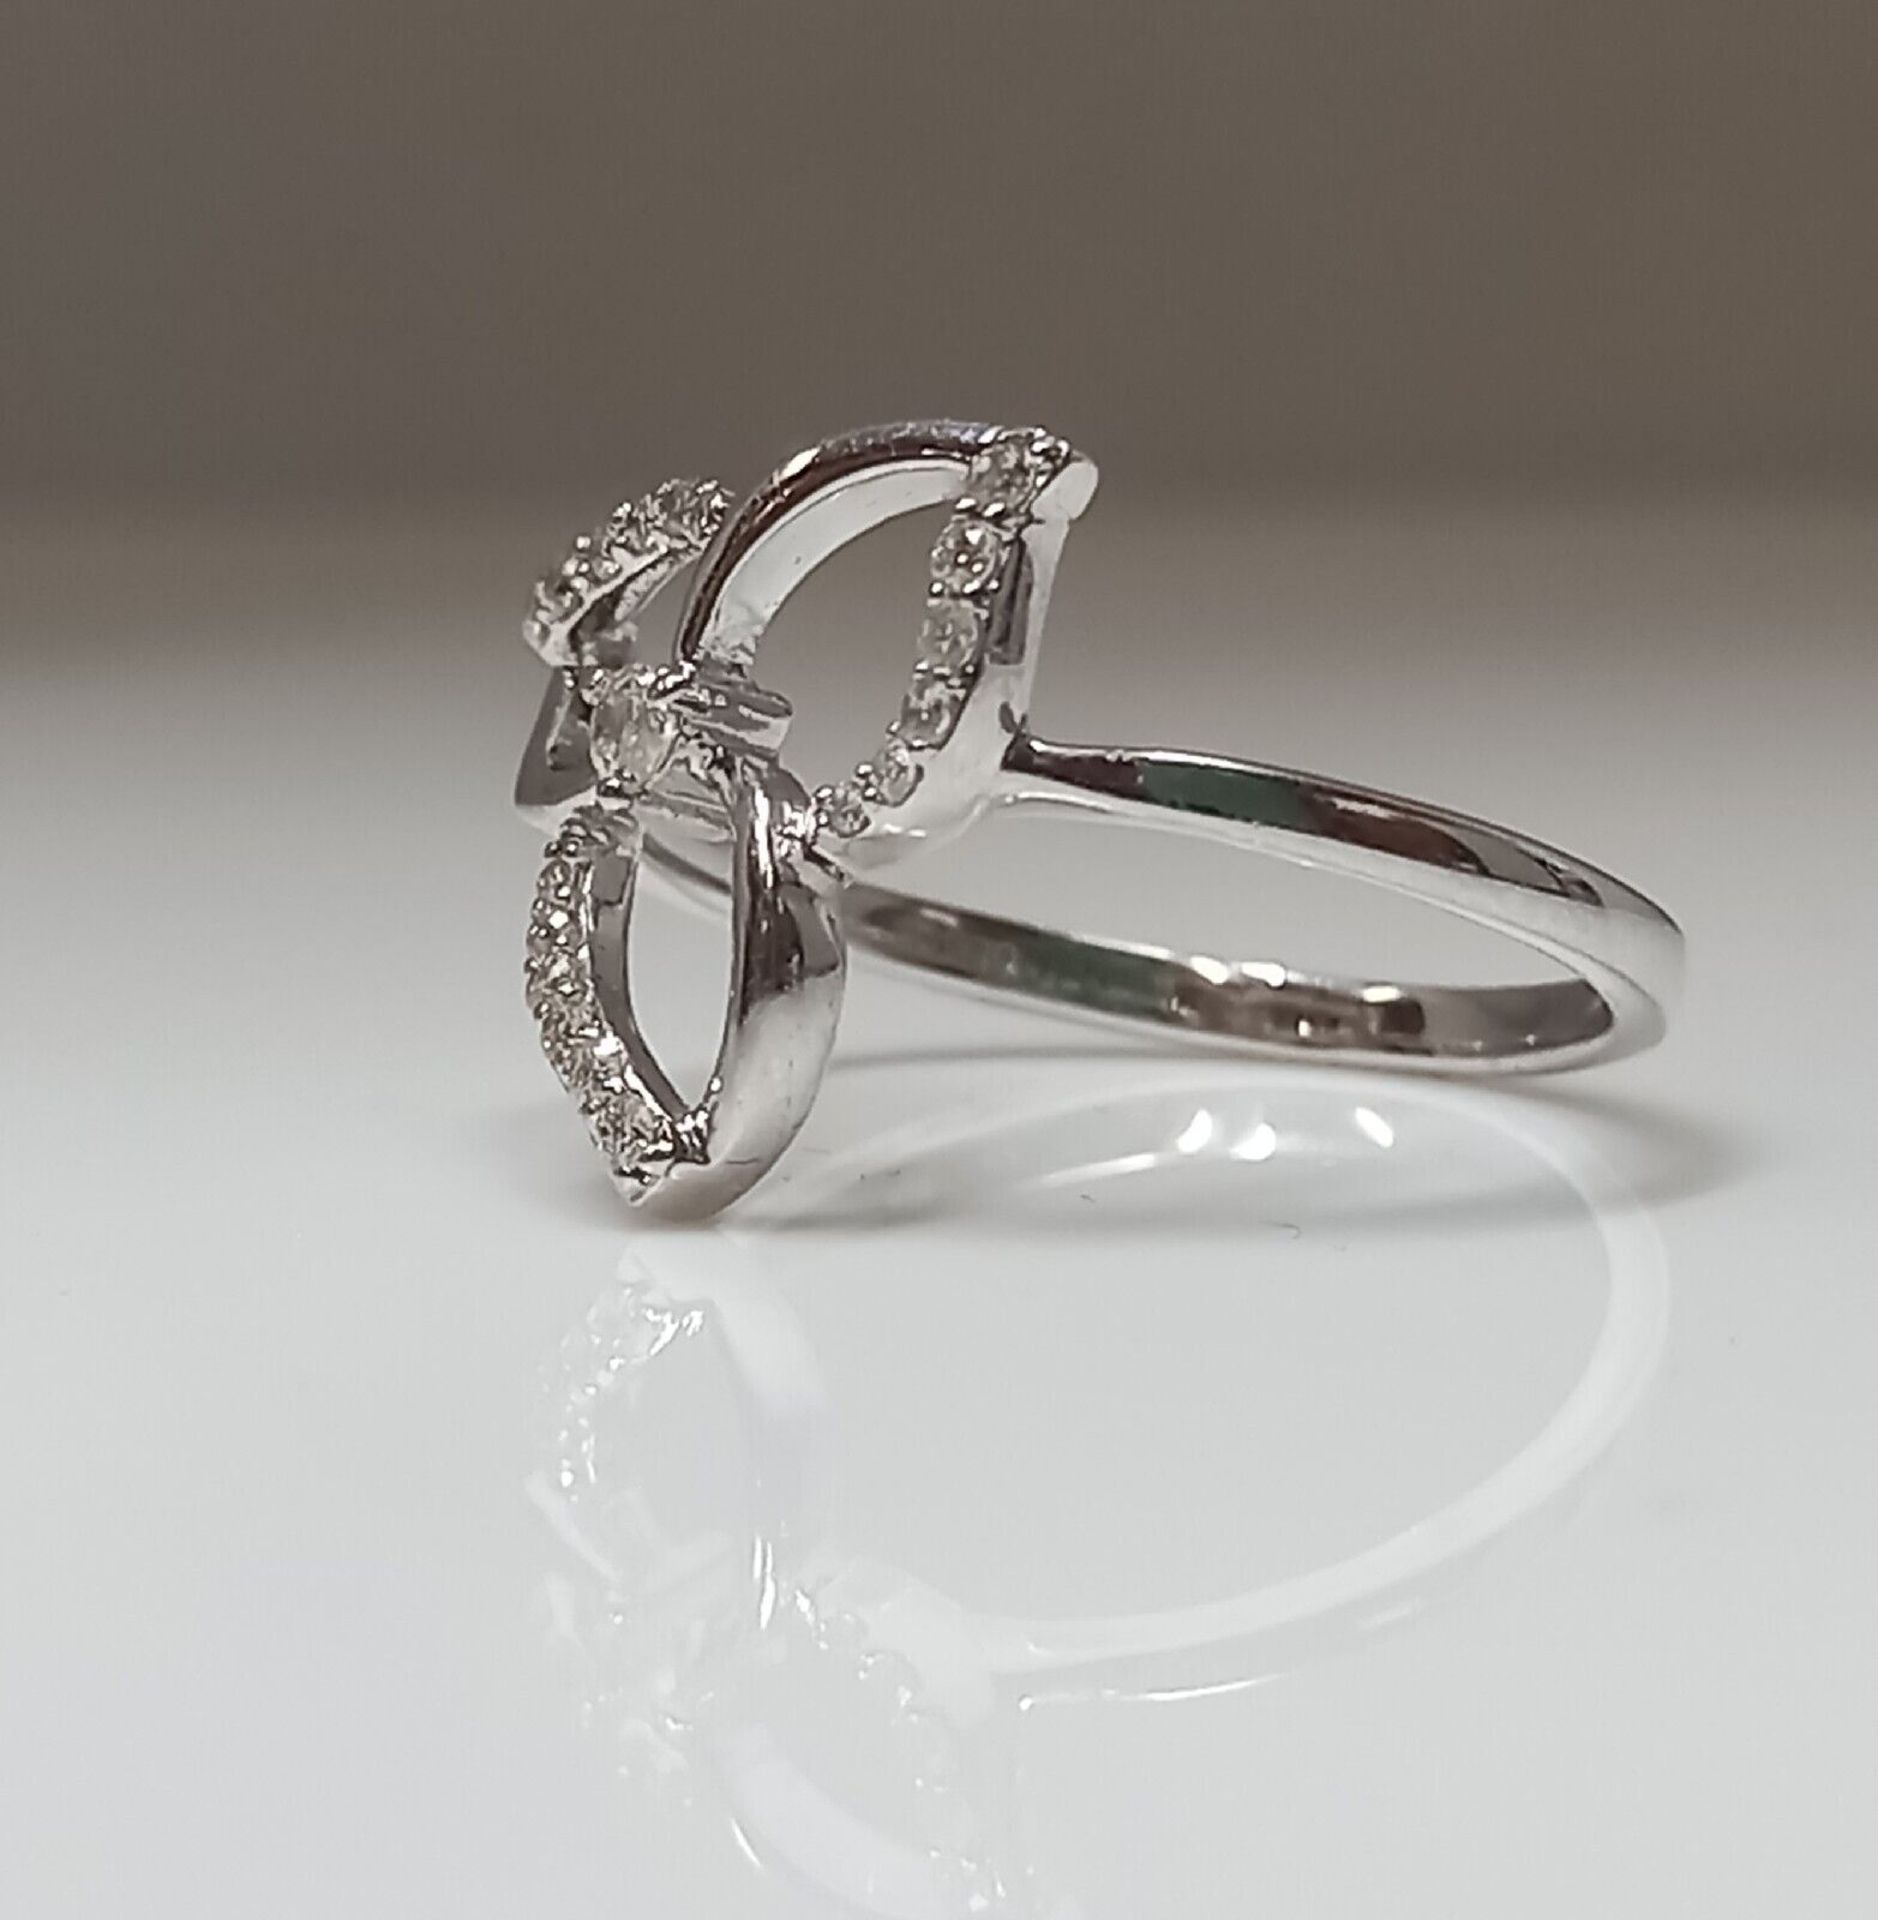 0.35CT DIAMOND DRESS RING/FLOWER DESIGN/9CT WHITE GOLD IN GIFT BOX + VALUATION CERTIFICATE OF £795 - Image 5 of 8